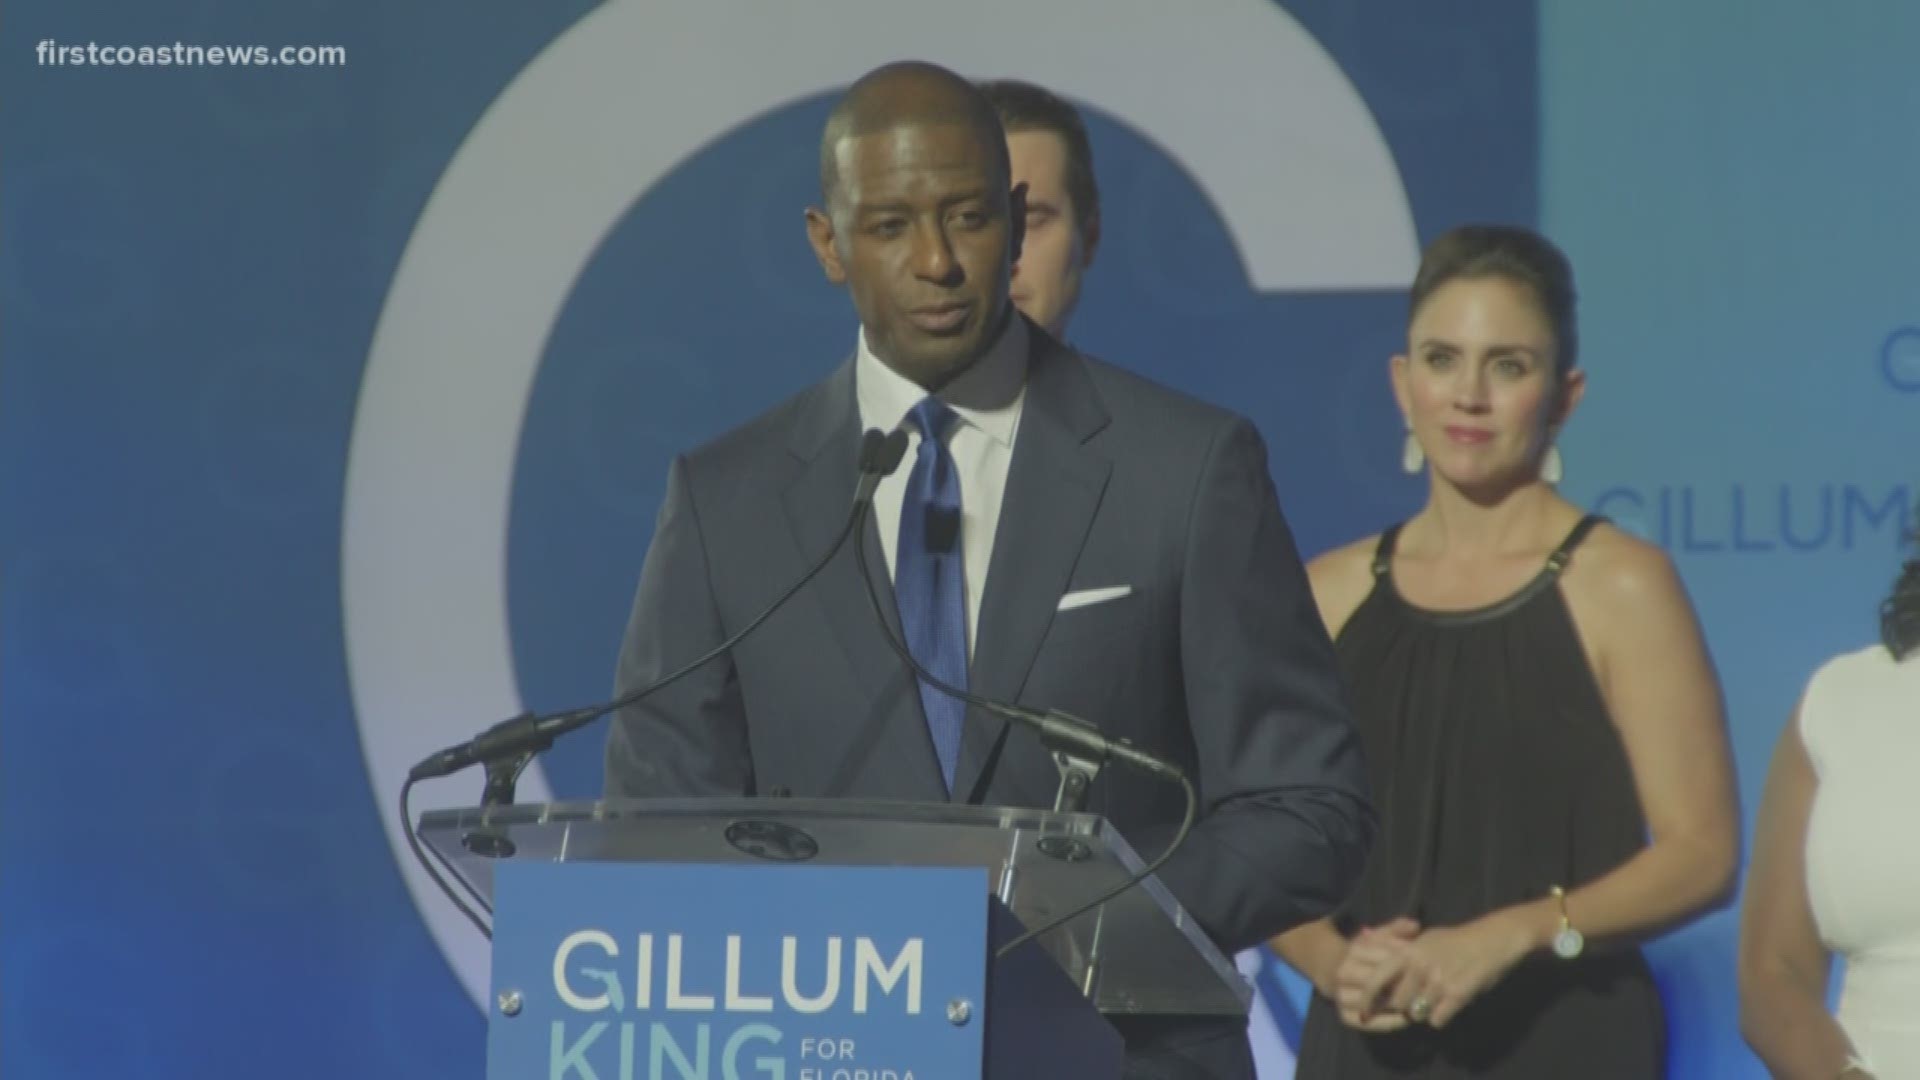 Andrew Gillum concedes Florida Governor race to Ron DeSantis, 'I still plan to be on the front lines right along side every single one of you when it comes to standing up for what we believe in.'